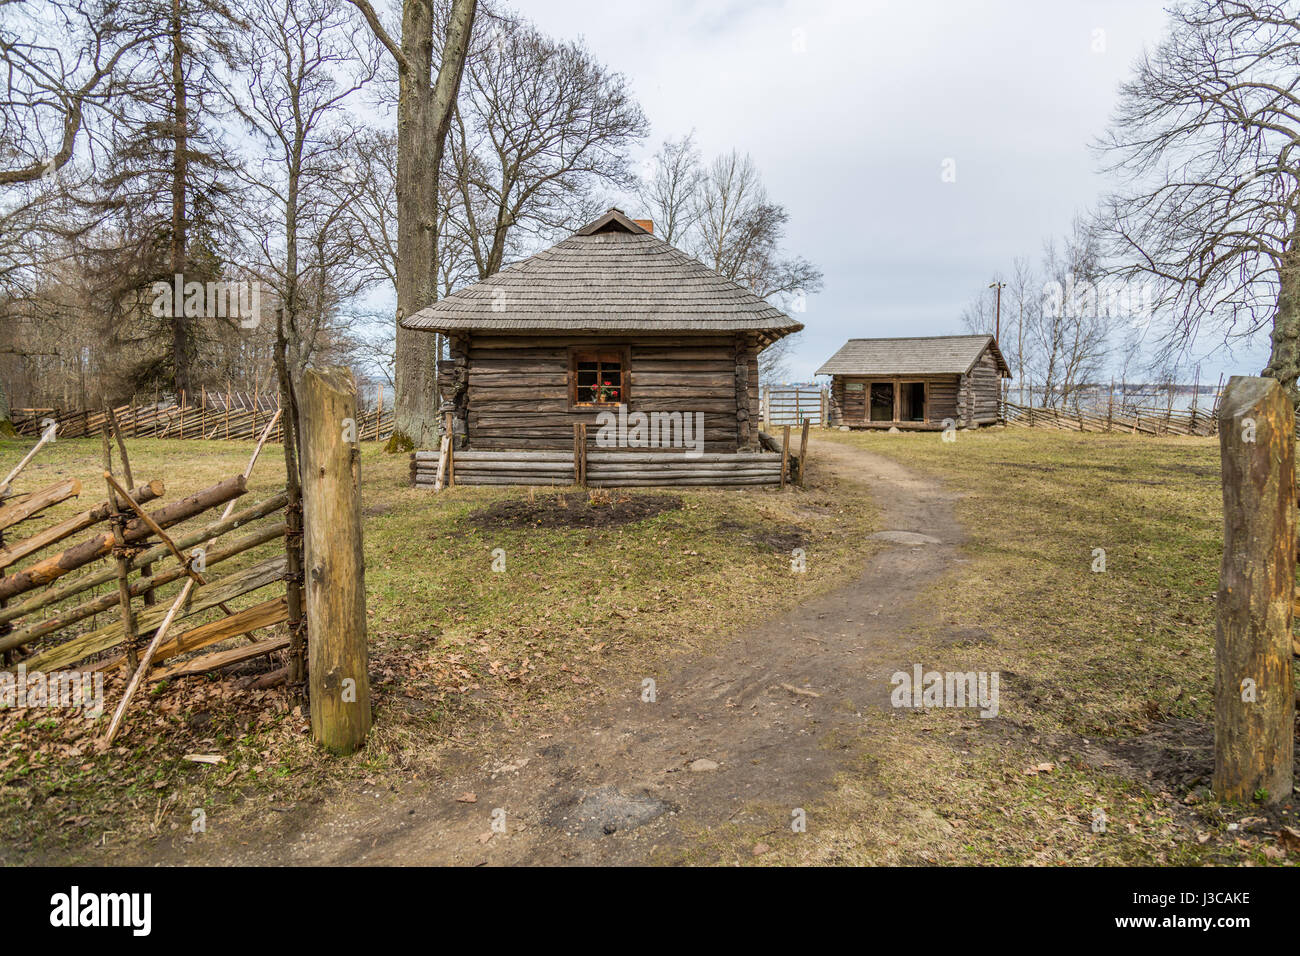 Agricultural buildings of wood and stone with thatched roofs, installed on Estonian ethnographic territory under the open sky. Rocca al Mare Stock Photo